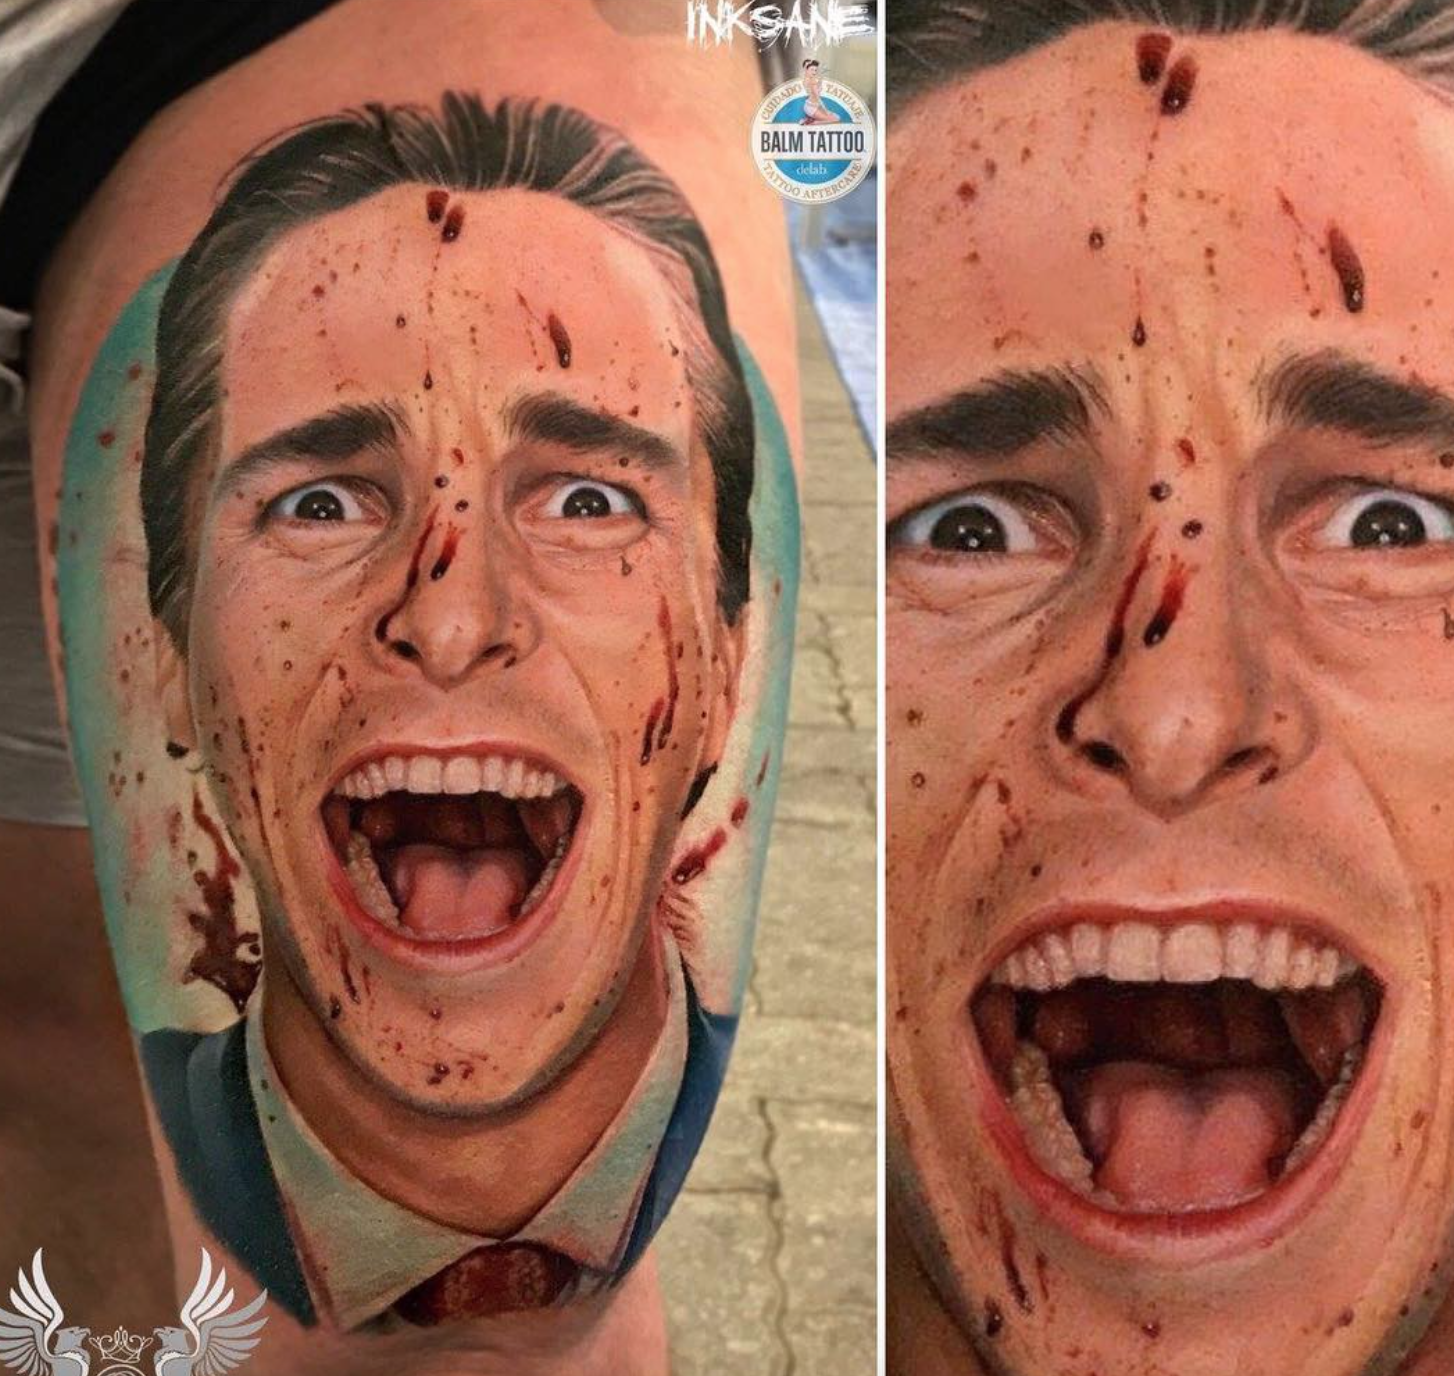 Claire Griffin Christian Bale tattoo